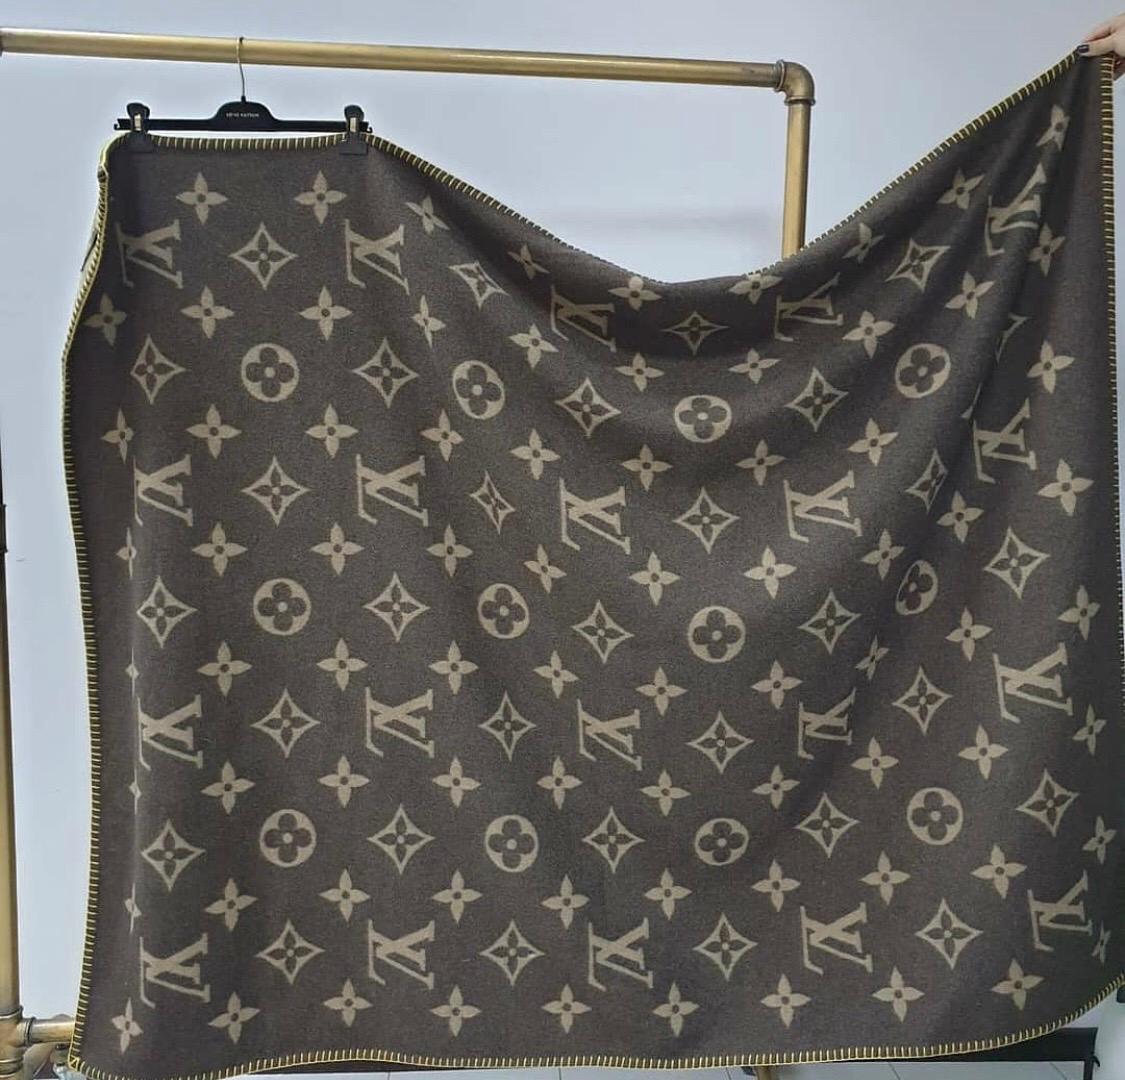 This classic Monogram blanket in  is perfect for cocooning at home or throwing over your shoulder for an audacious and trendy look

100% Cashmere
180*135 cm
Monogram signature all-over the pattern.

Very good condition.

For buyers from EU we can